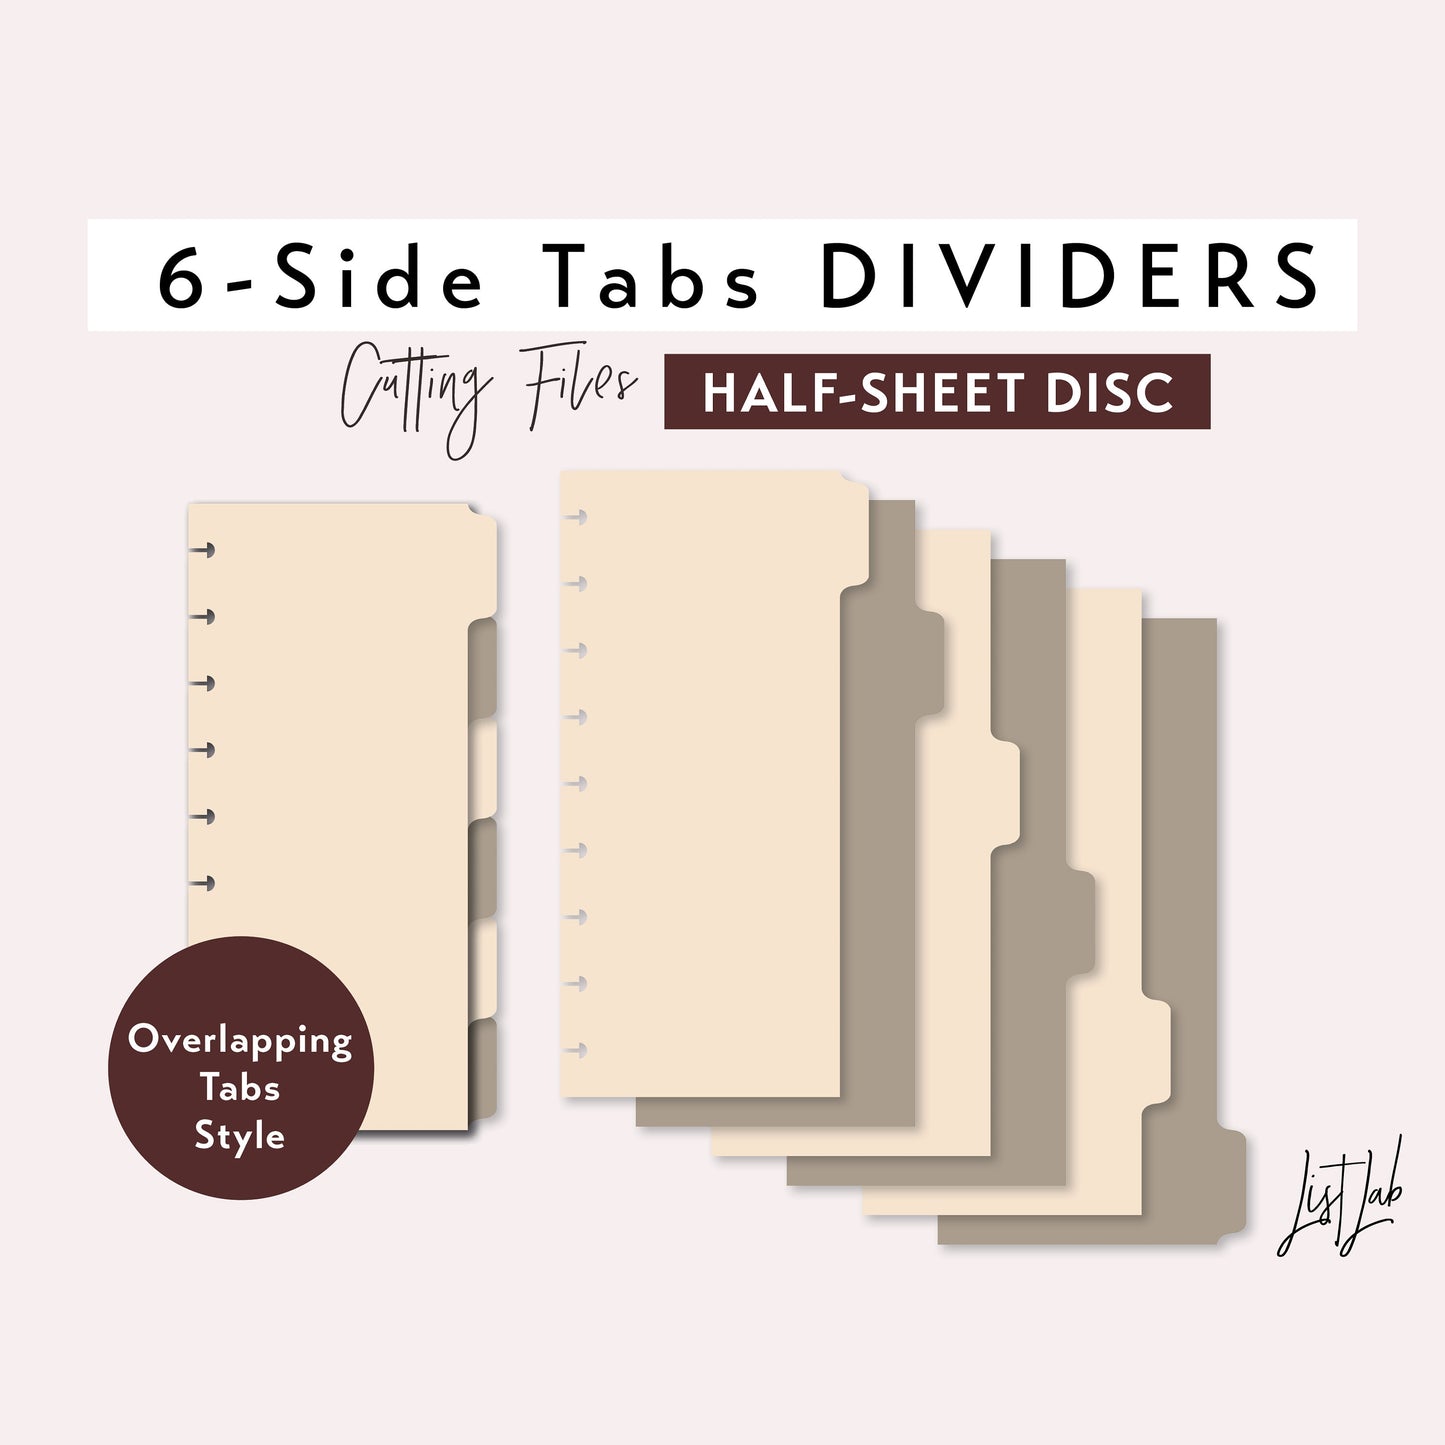 Half-Sheet / Skinny Classic Discbound 6-SIDE Tab Dividers Cutting Files Set